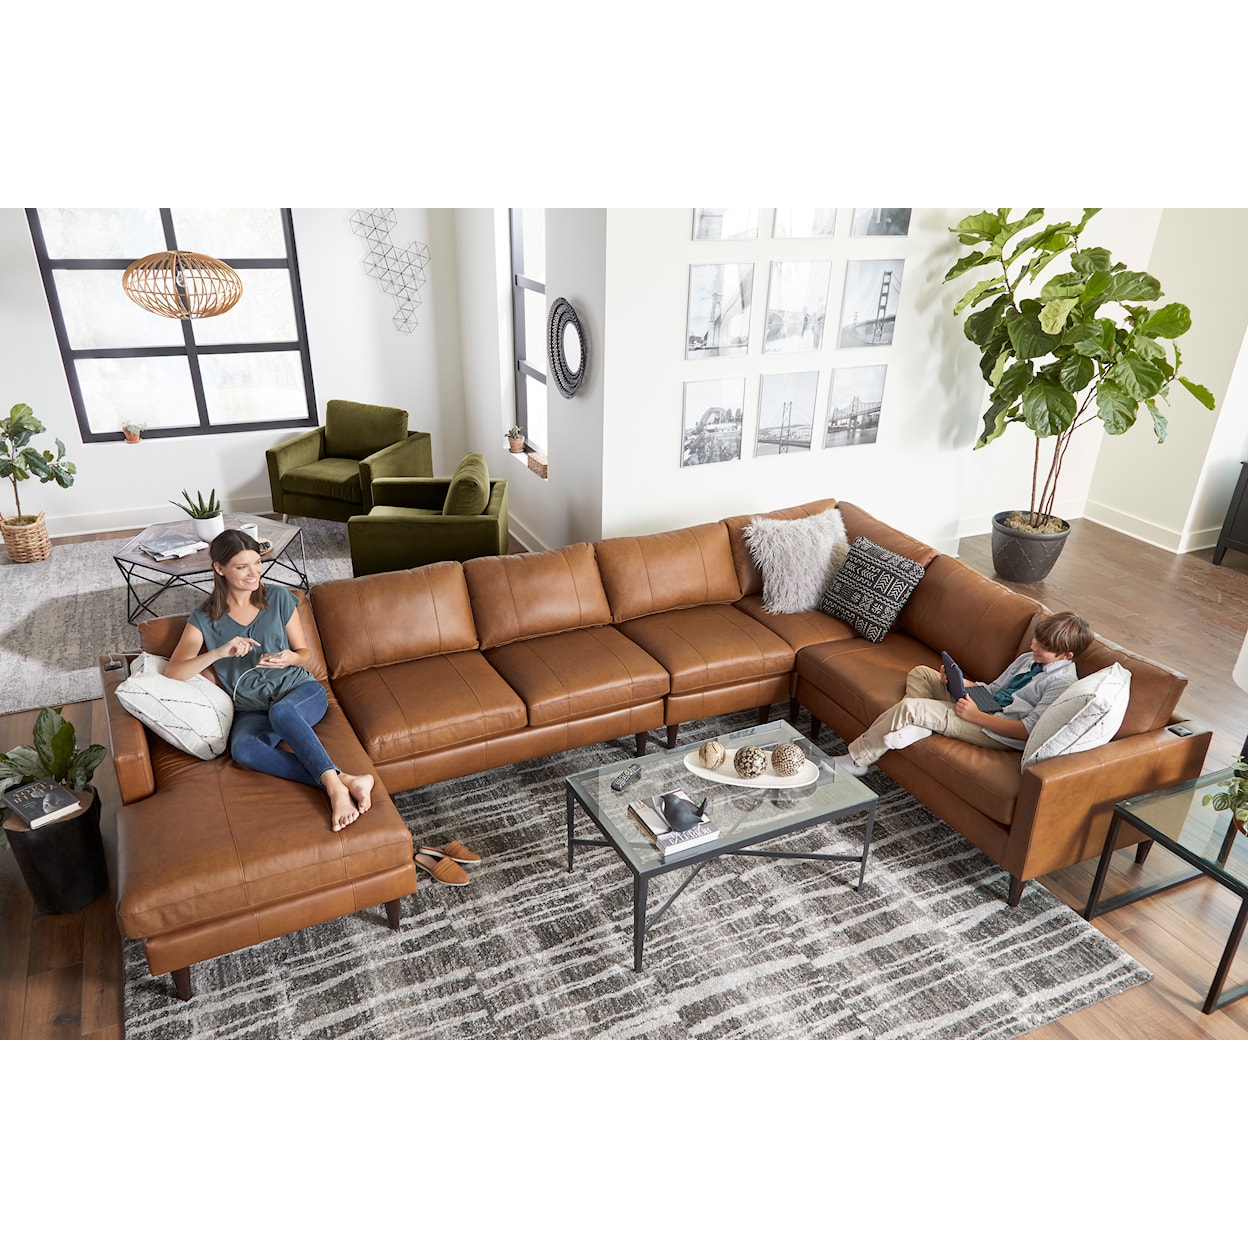 Best Home Furnishings Trafton Leather Sectional Sofa w/ Chaise & Wood Feet